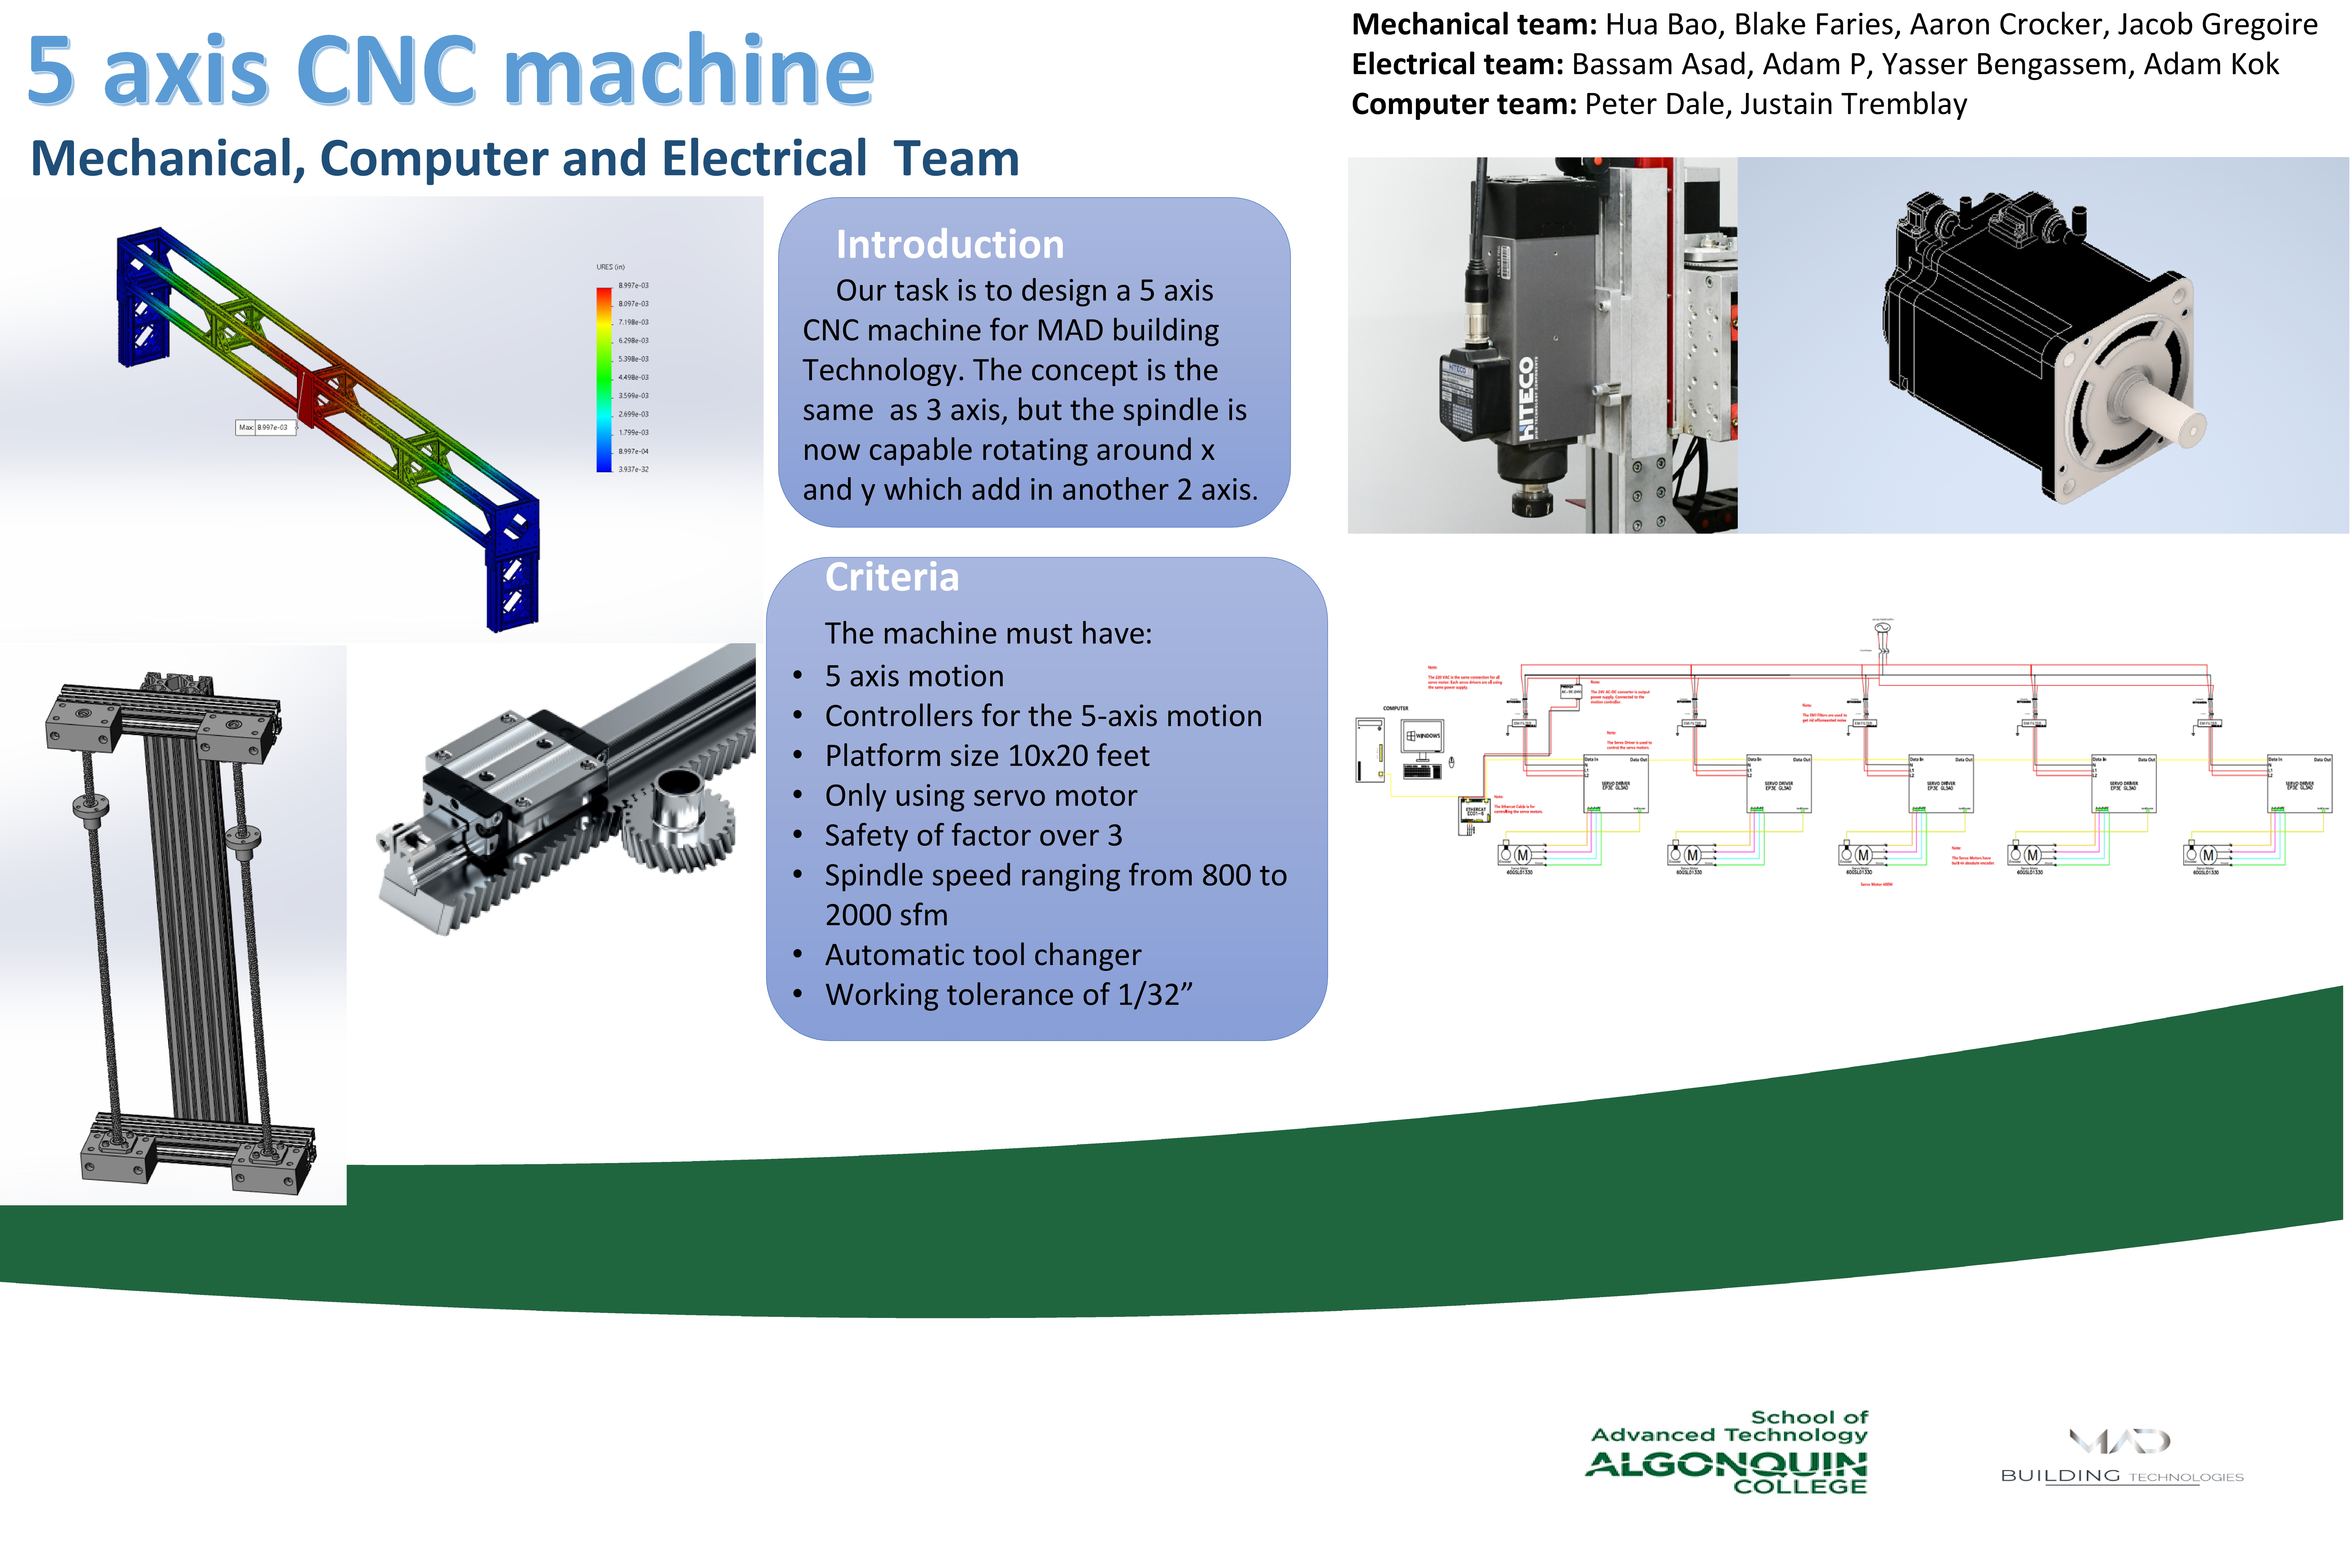 Project poster for a 5-axis CNC machine with 3d CAD model and electrical circuit